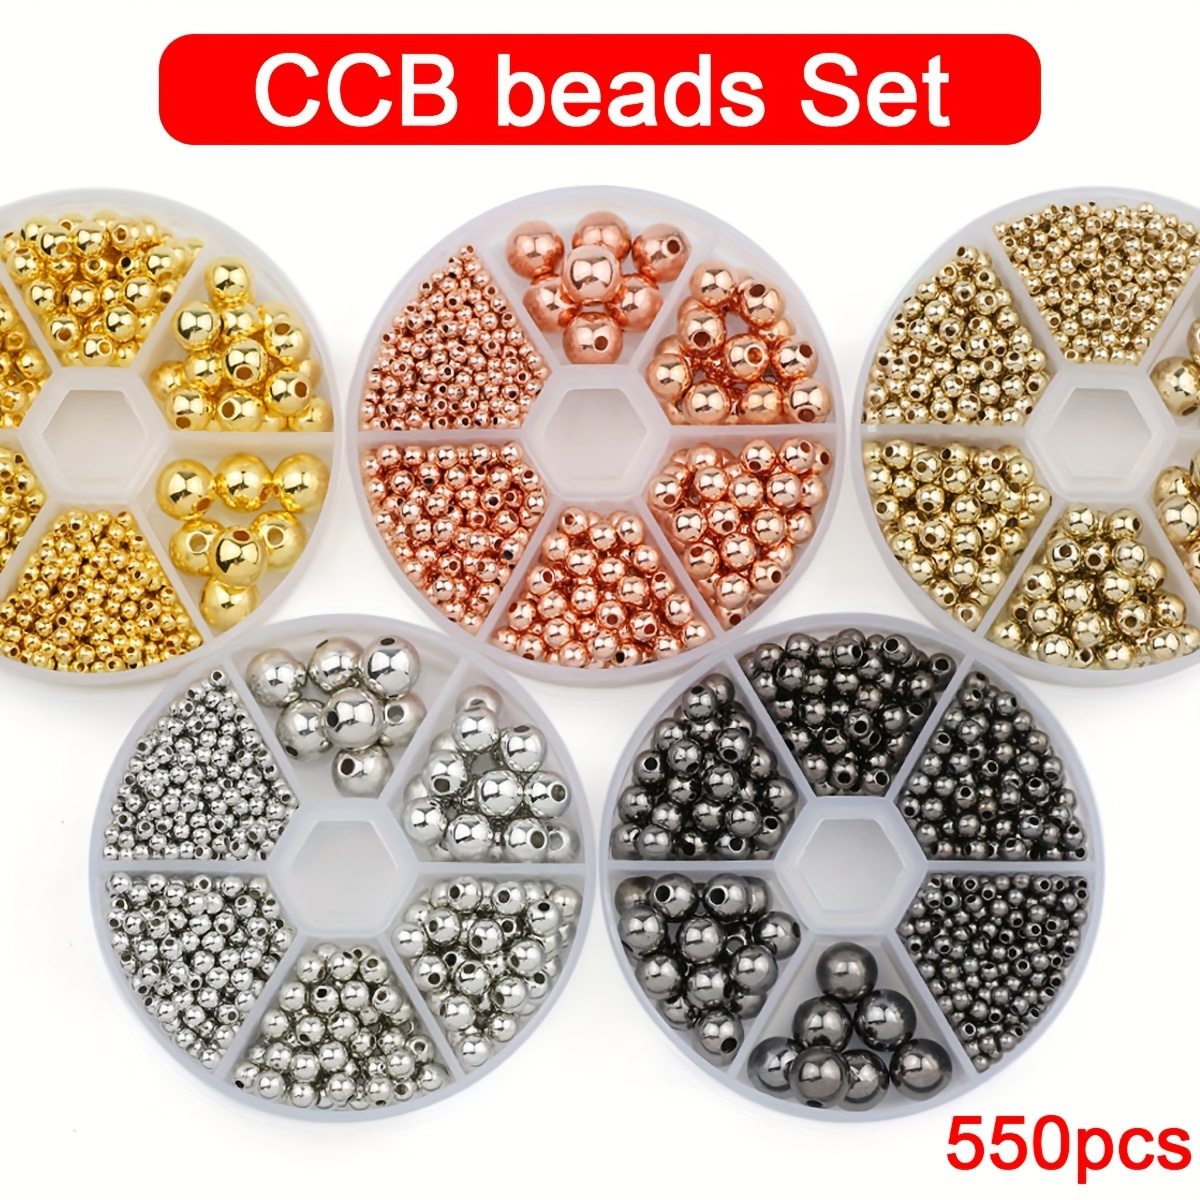 PAVA 550pcs Crystal Beads Kit for Bracelet Jewelry Making, 8mm Loose  Gemstone Crystal 7 Chakras Healing Natural Stone Beads with Accessories,  DIY